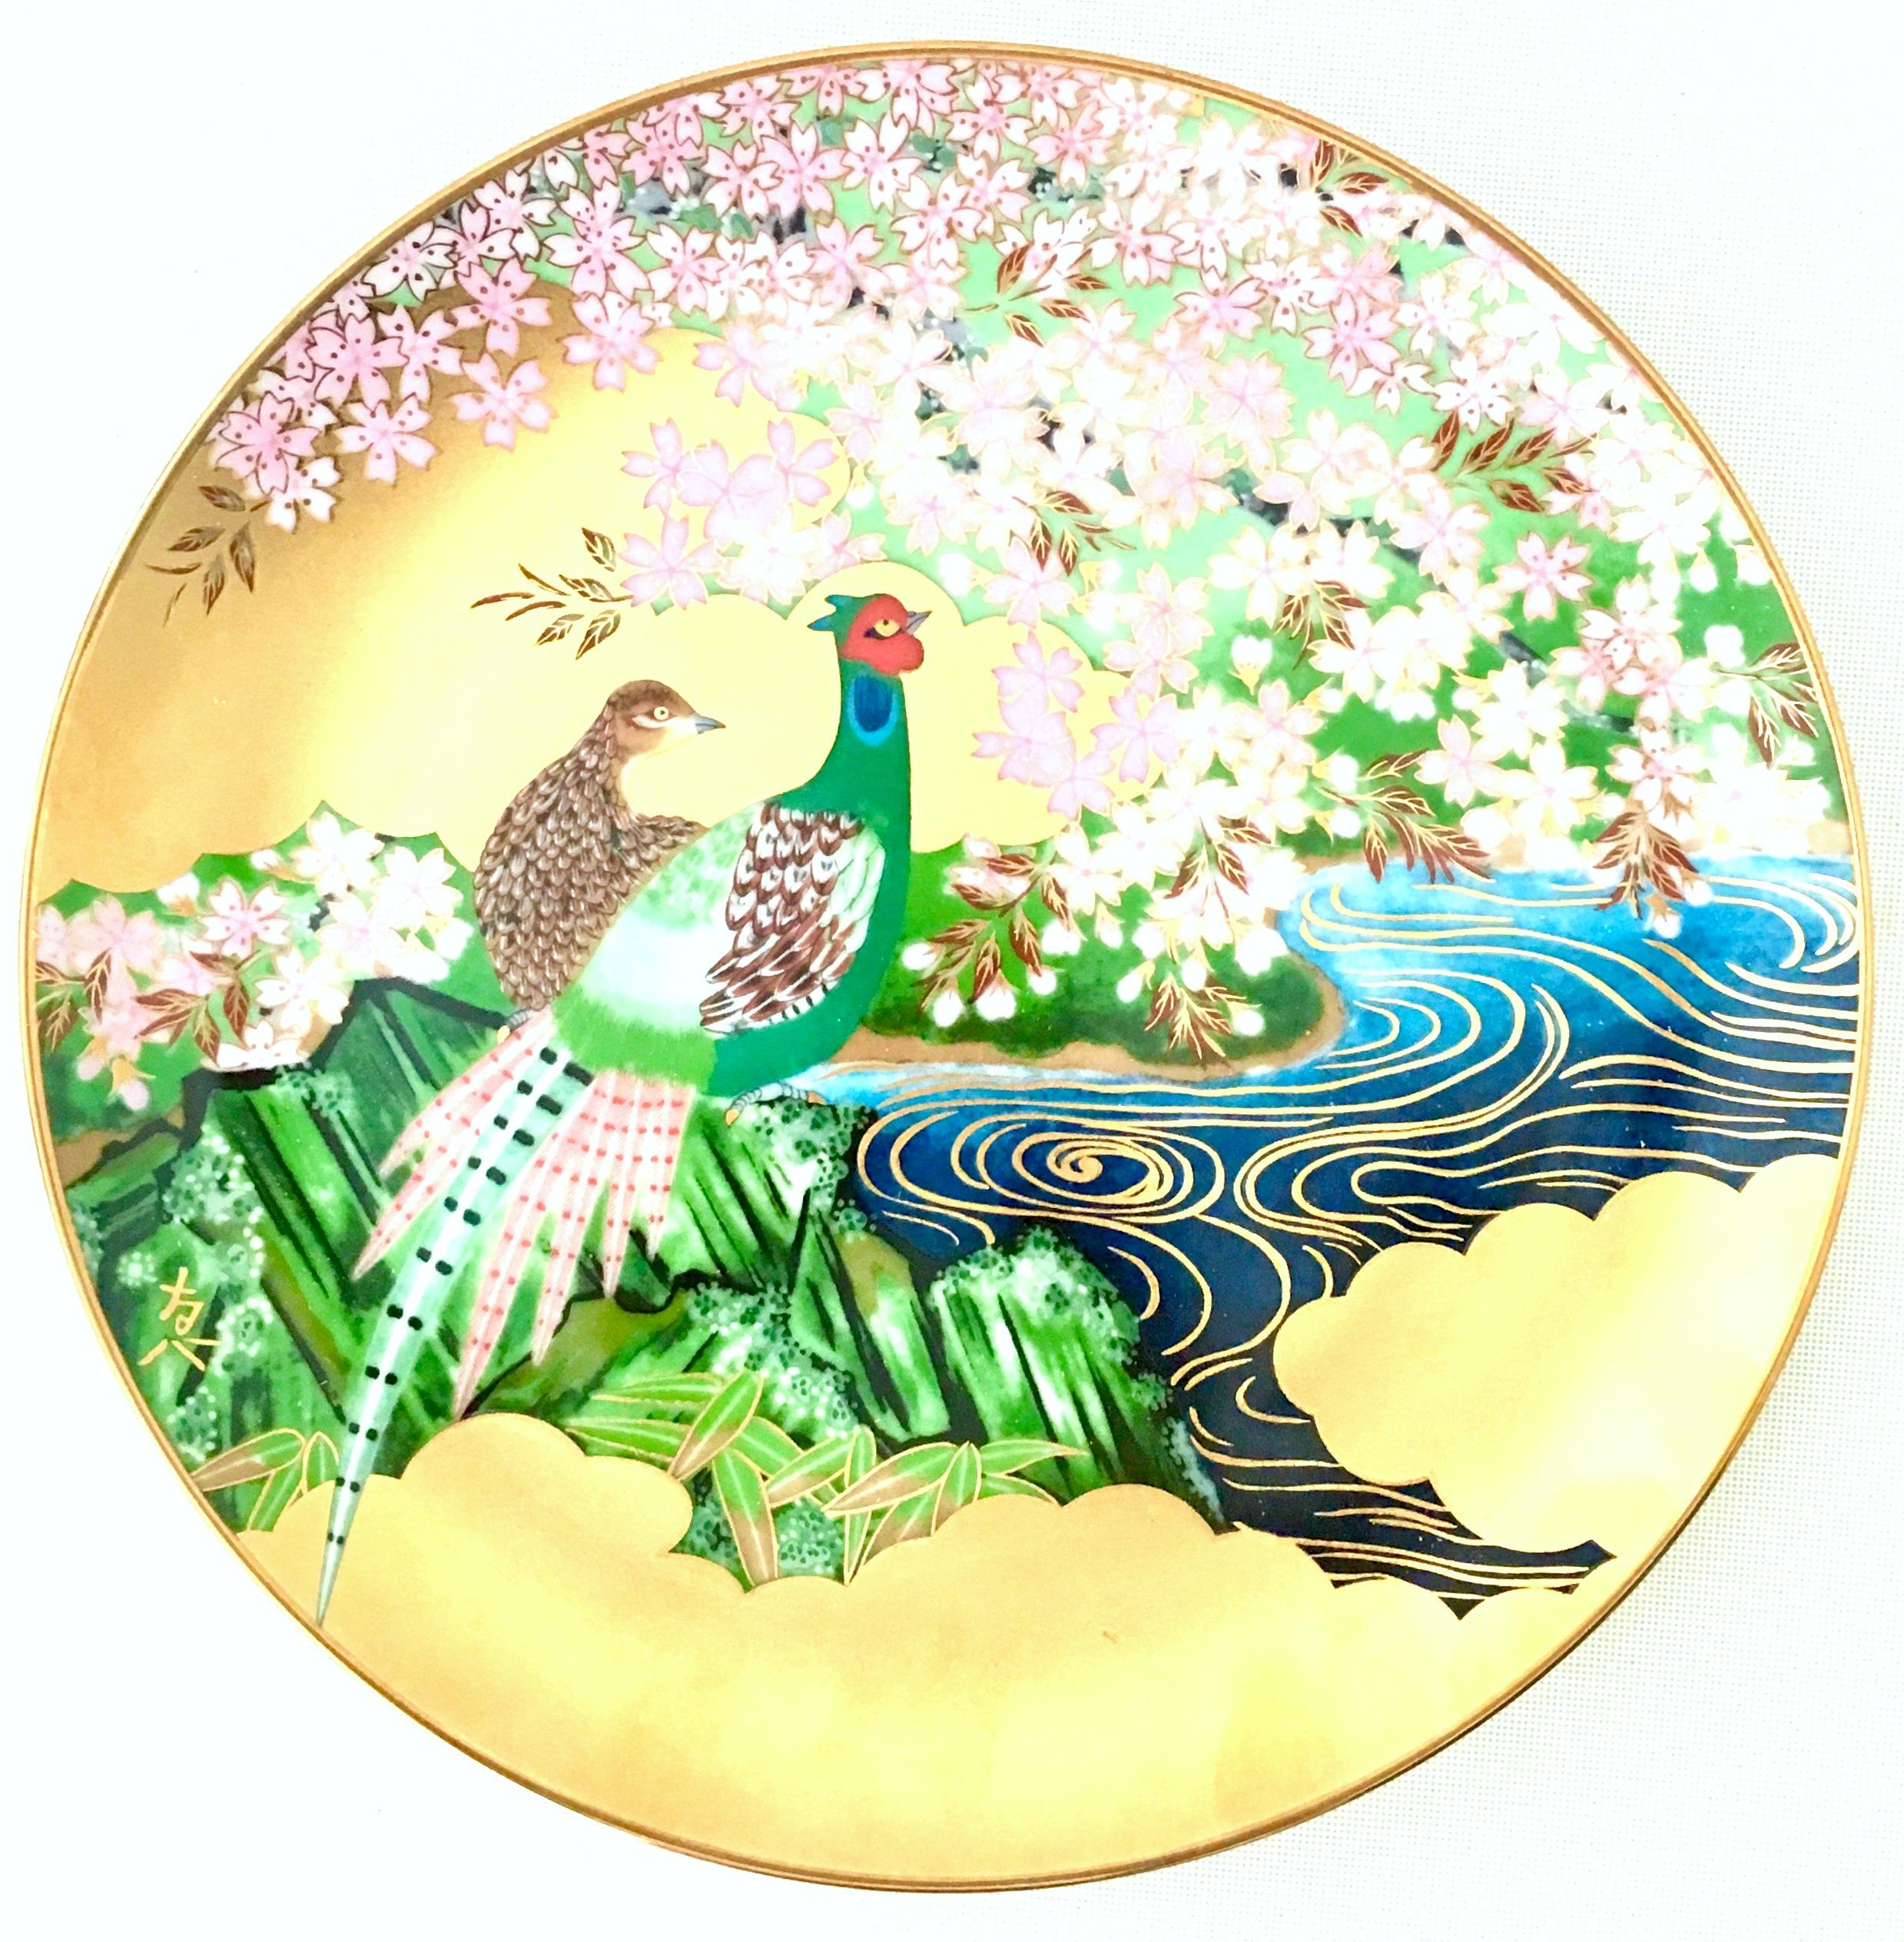 20th Century 1986 Japanese Limited Edition Hand-Painted Porcelain Plates Set Of 4 For Sale